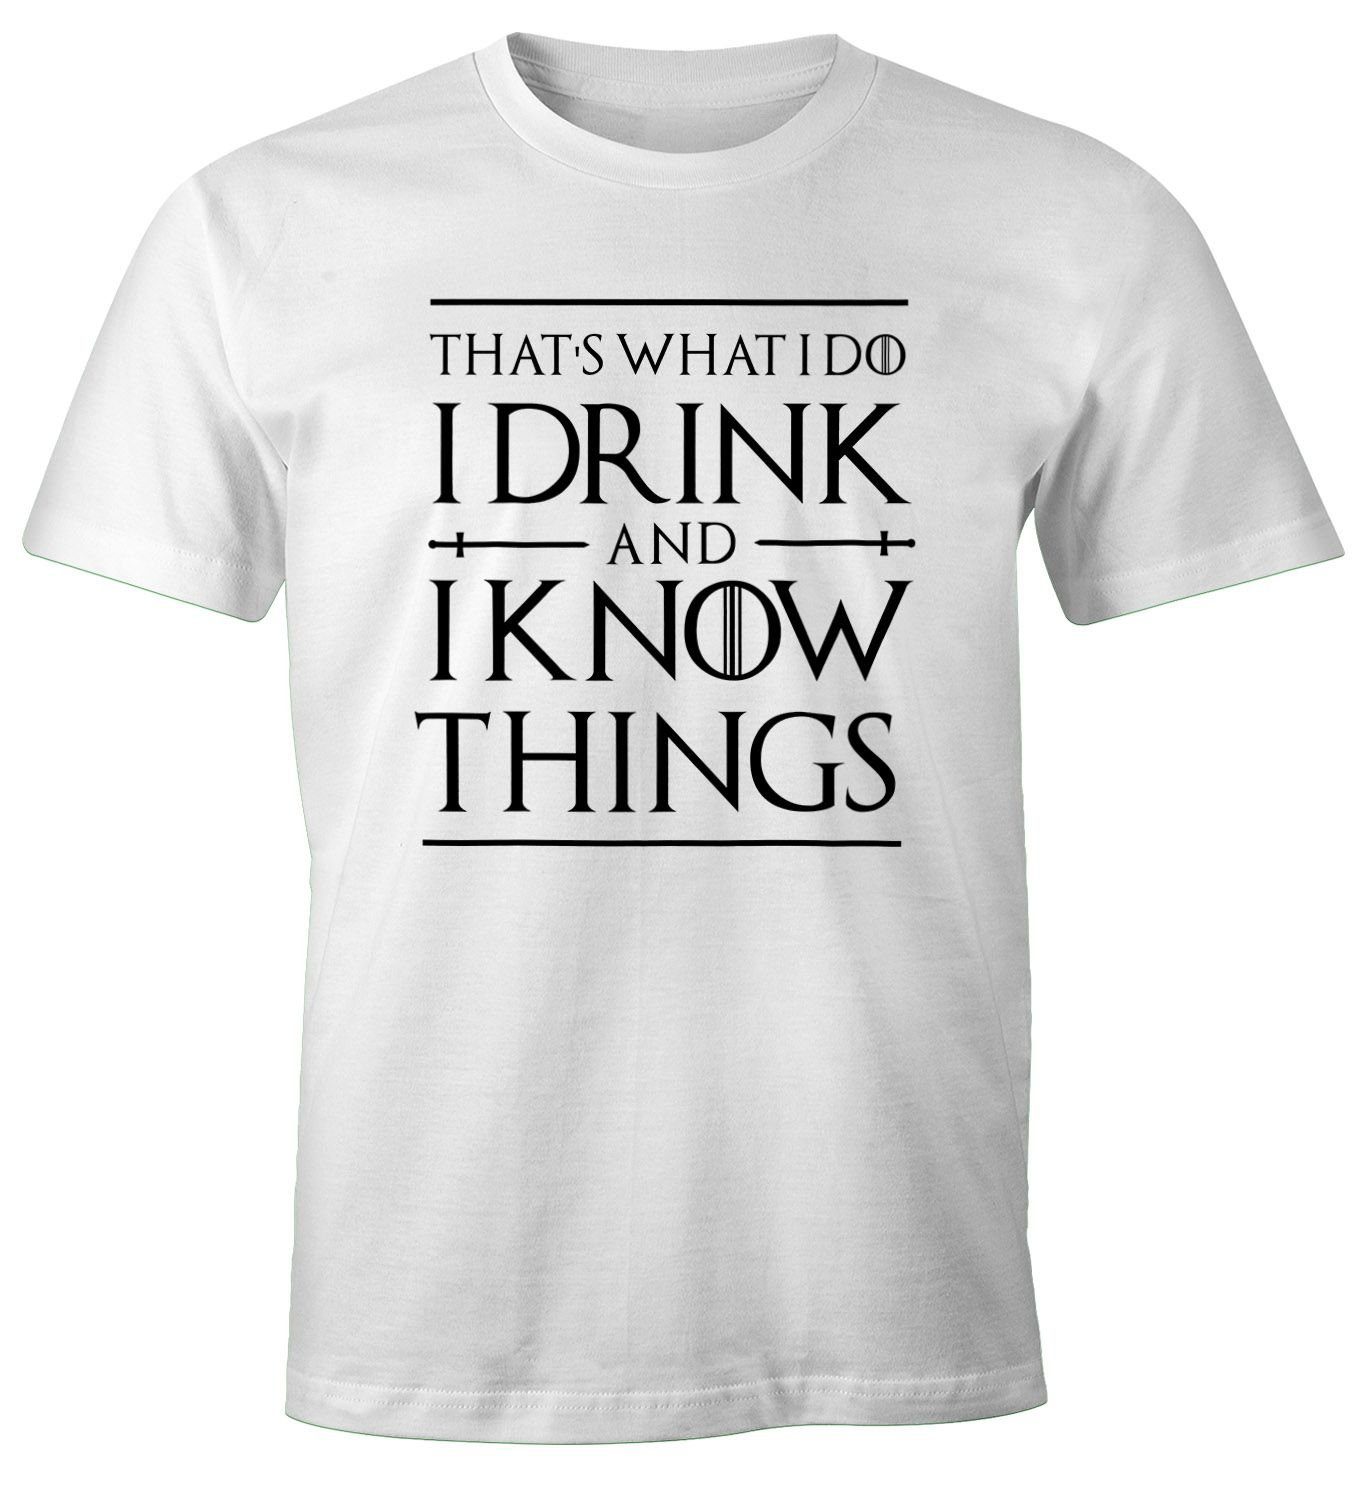 Spruch do Herren that's Moonworks® drink T-Shirt Print what know mit I things i i and MoonWorks Print-Shirt